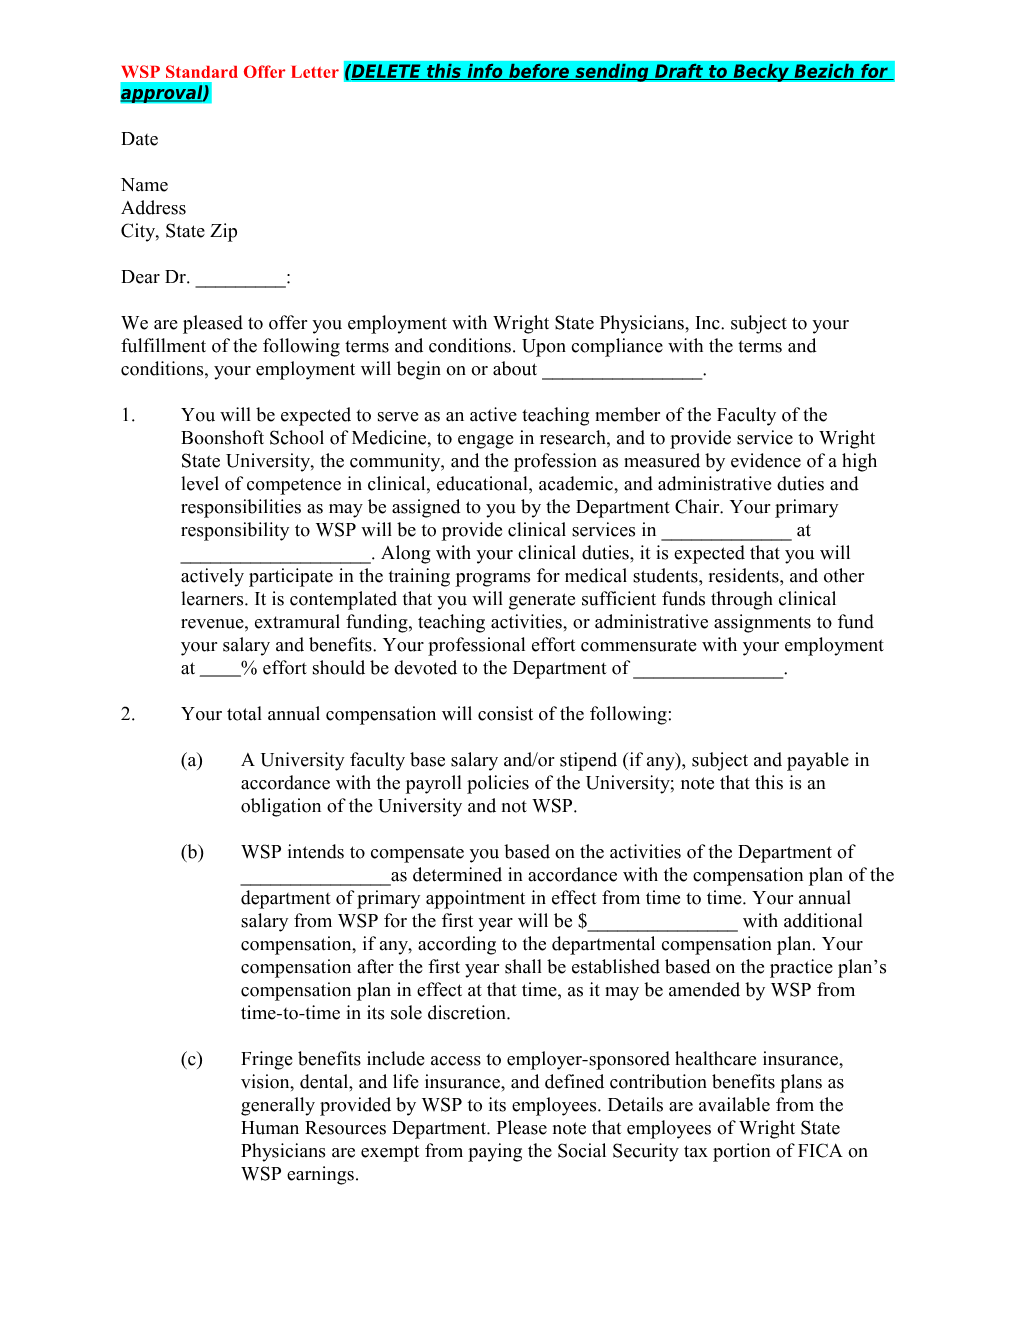 WSP Standard Offer Letter (DELETE This Info Before Sending Draft to Becky Bezich for Approval)